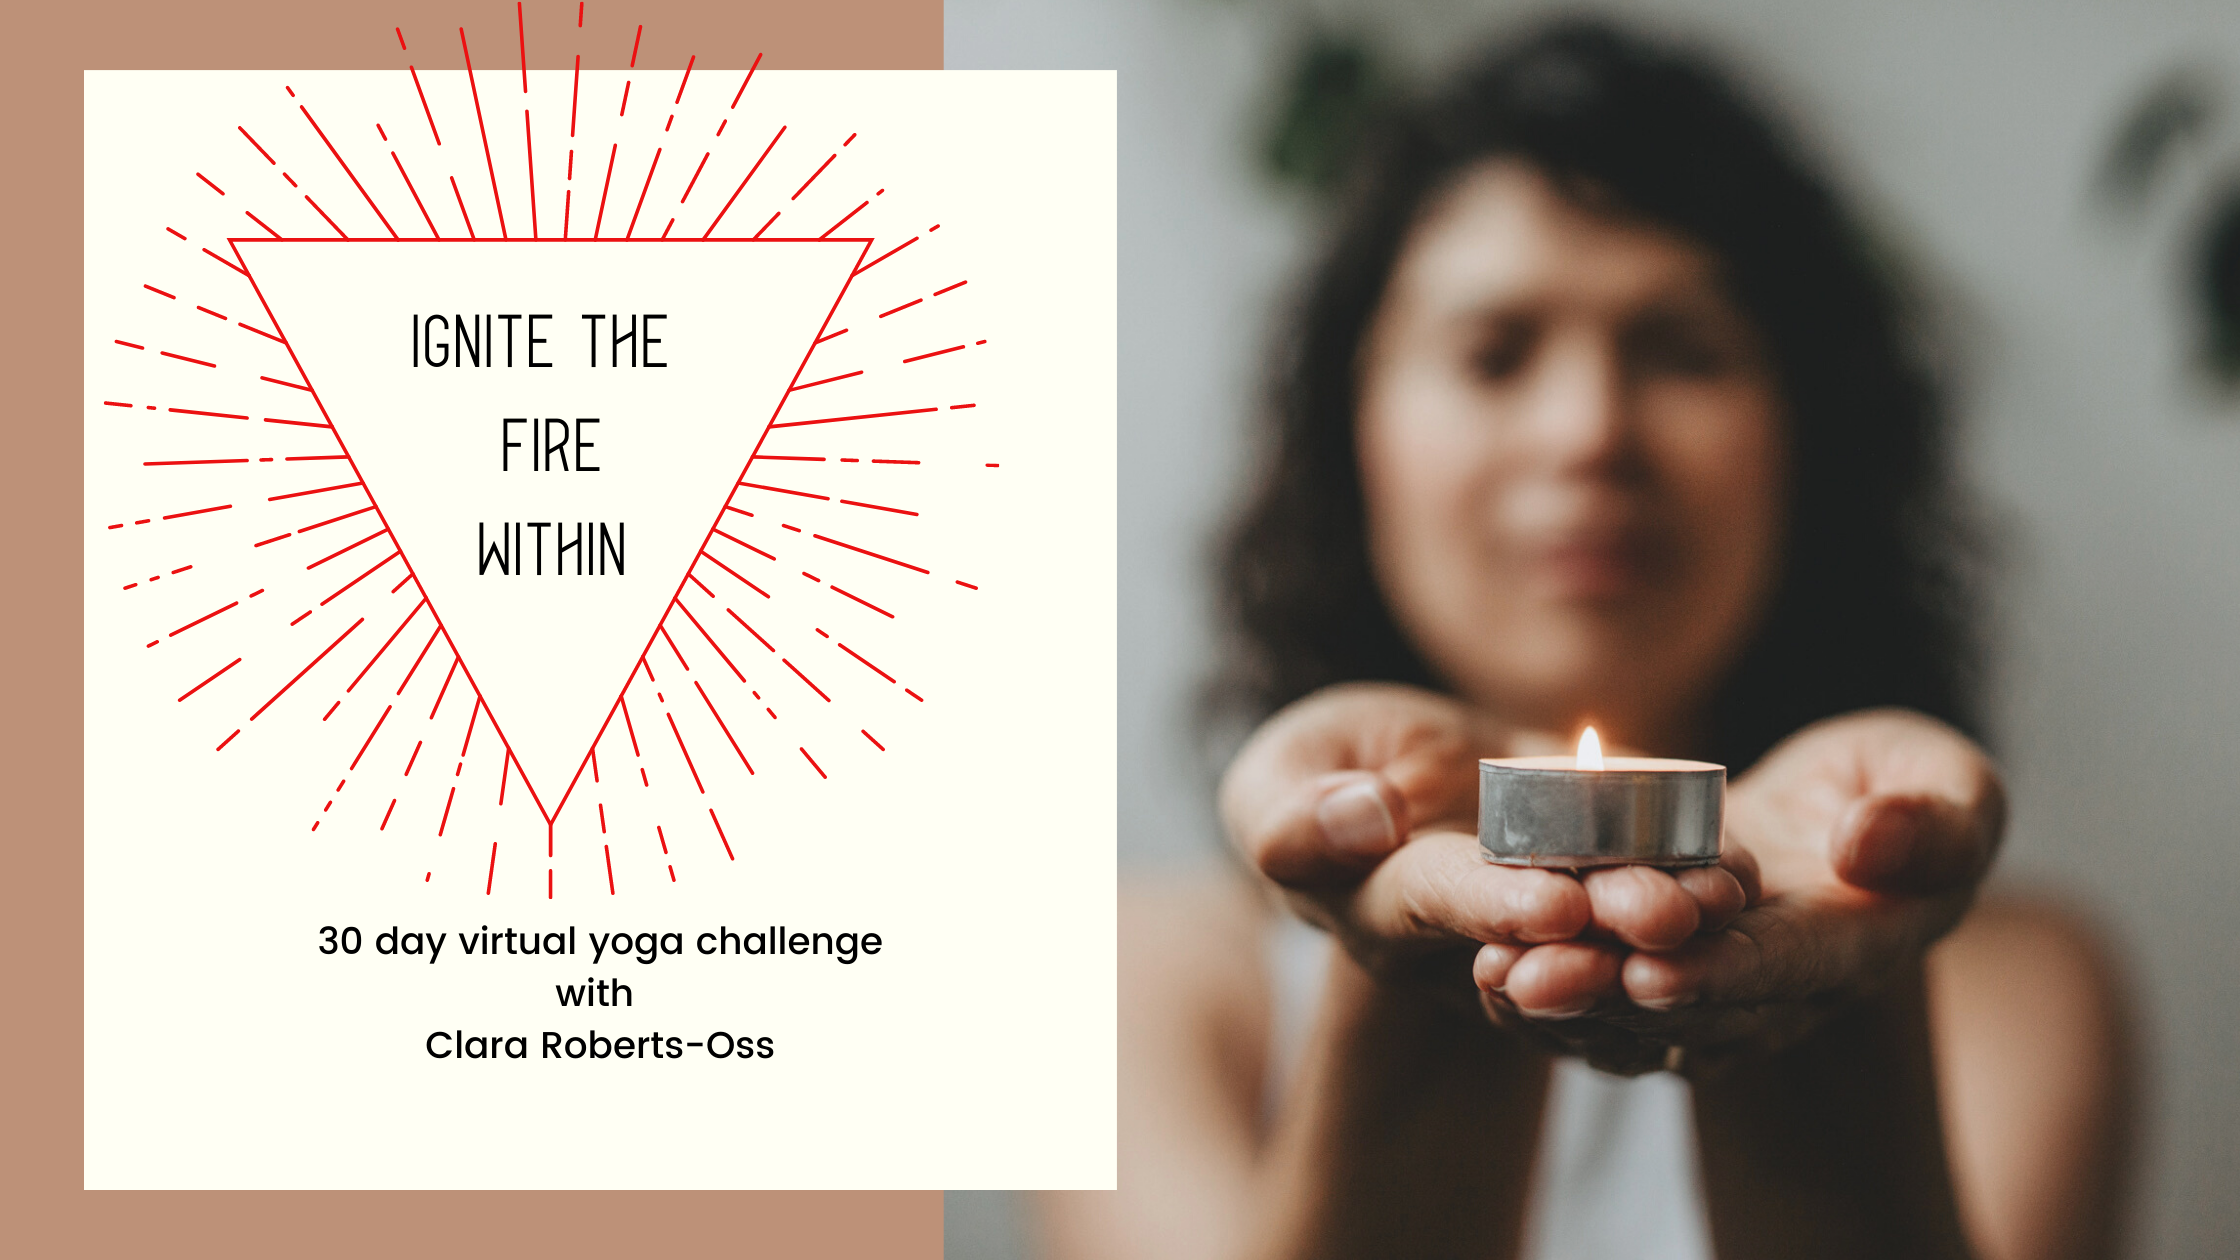 Ignite the Fire within - 30 day Yoga challenge